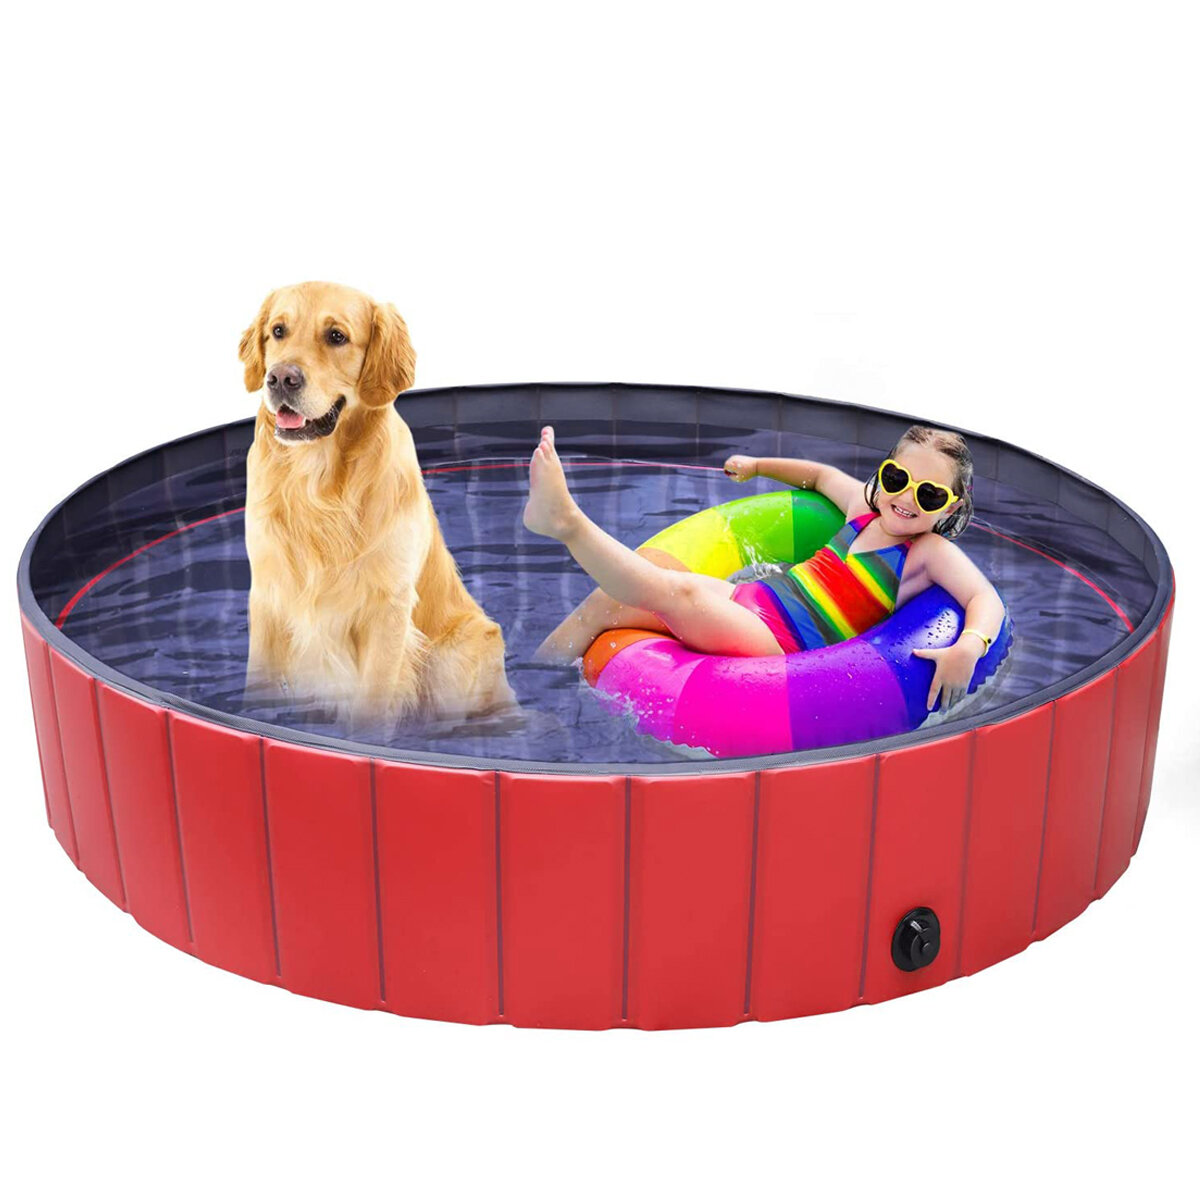 Image of 160cm Foldable Pet Bath Swimming Pool Collapsible Dog Pool Pet Bathing Tub Pool Kiddie Pool for Dogs Cats and Kids